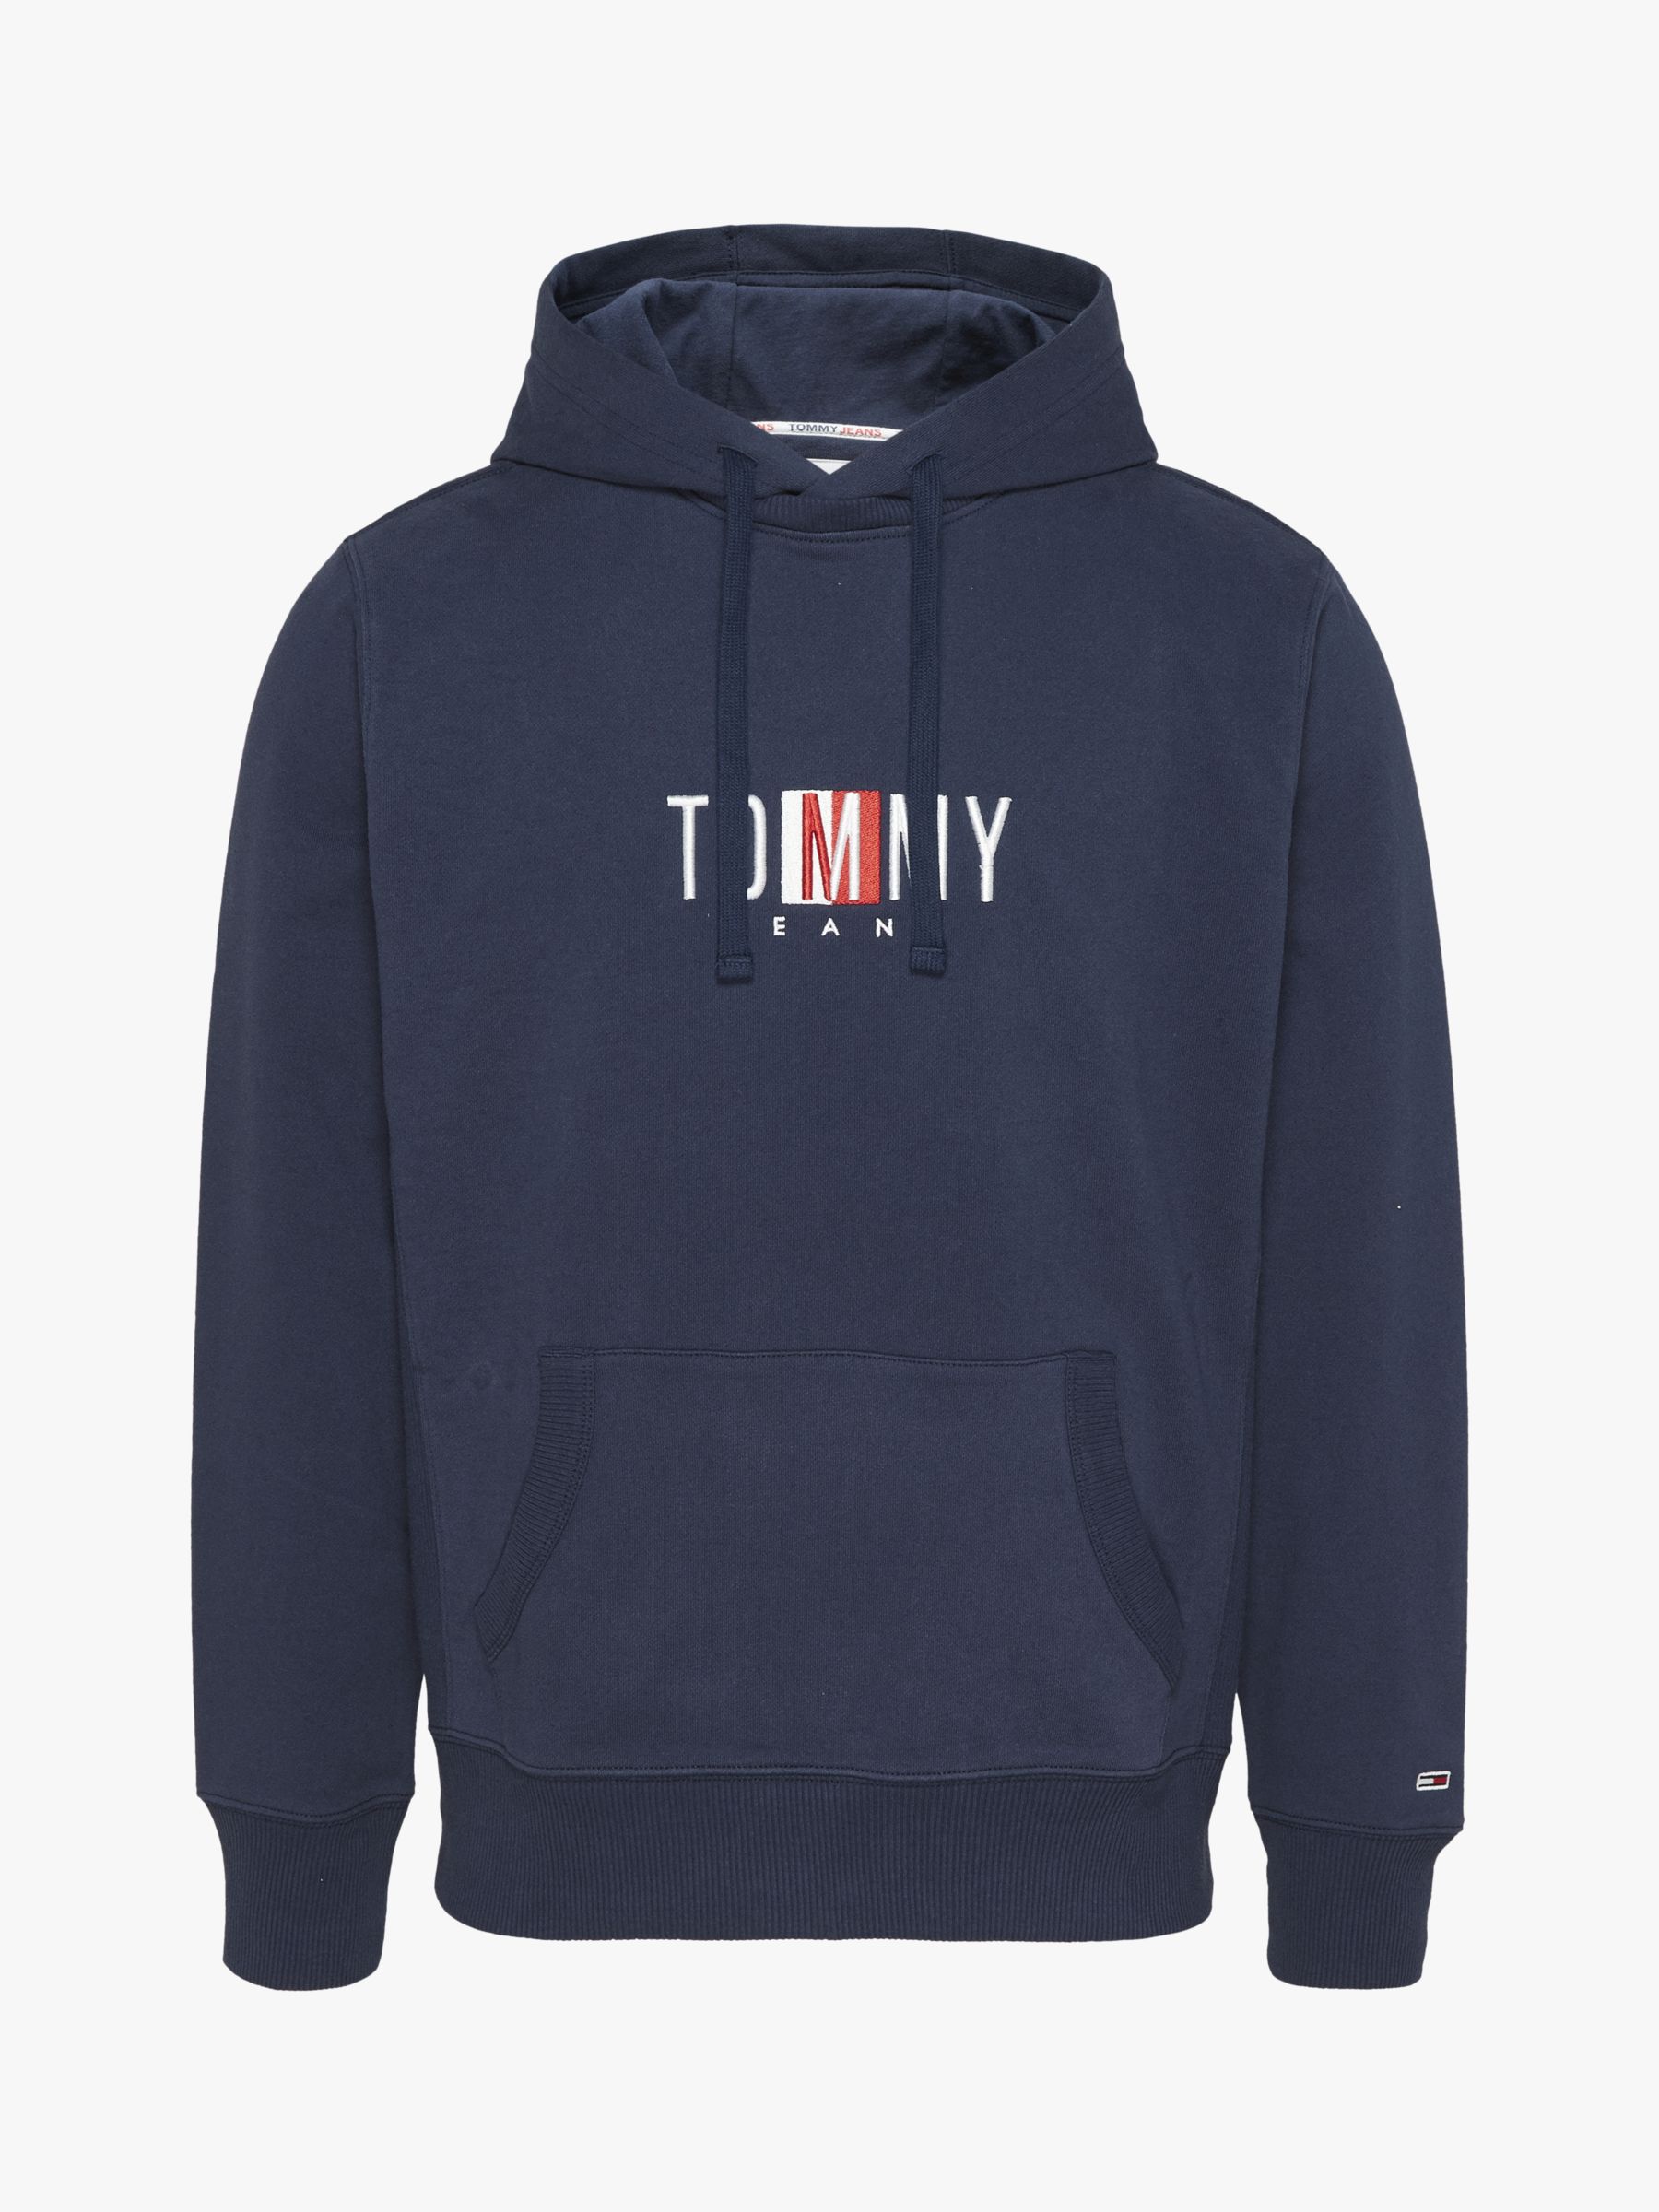 Tommy Jeans Straight Logo Hoodie, Twilight Navy at John Lewis & Partners